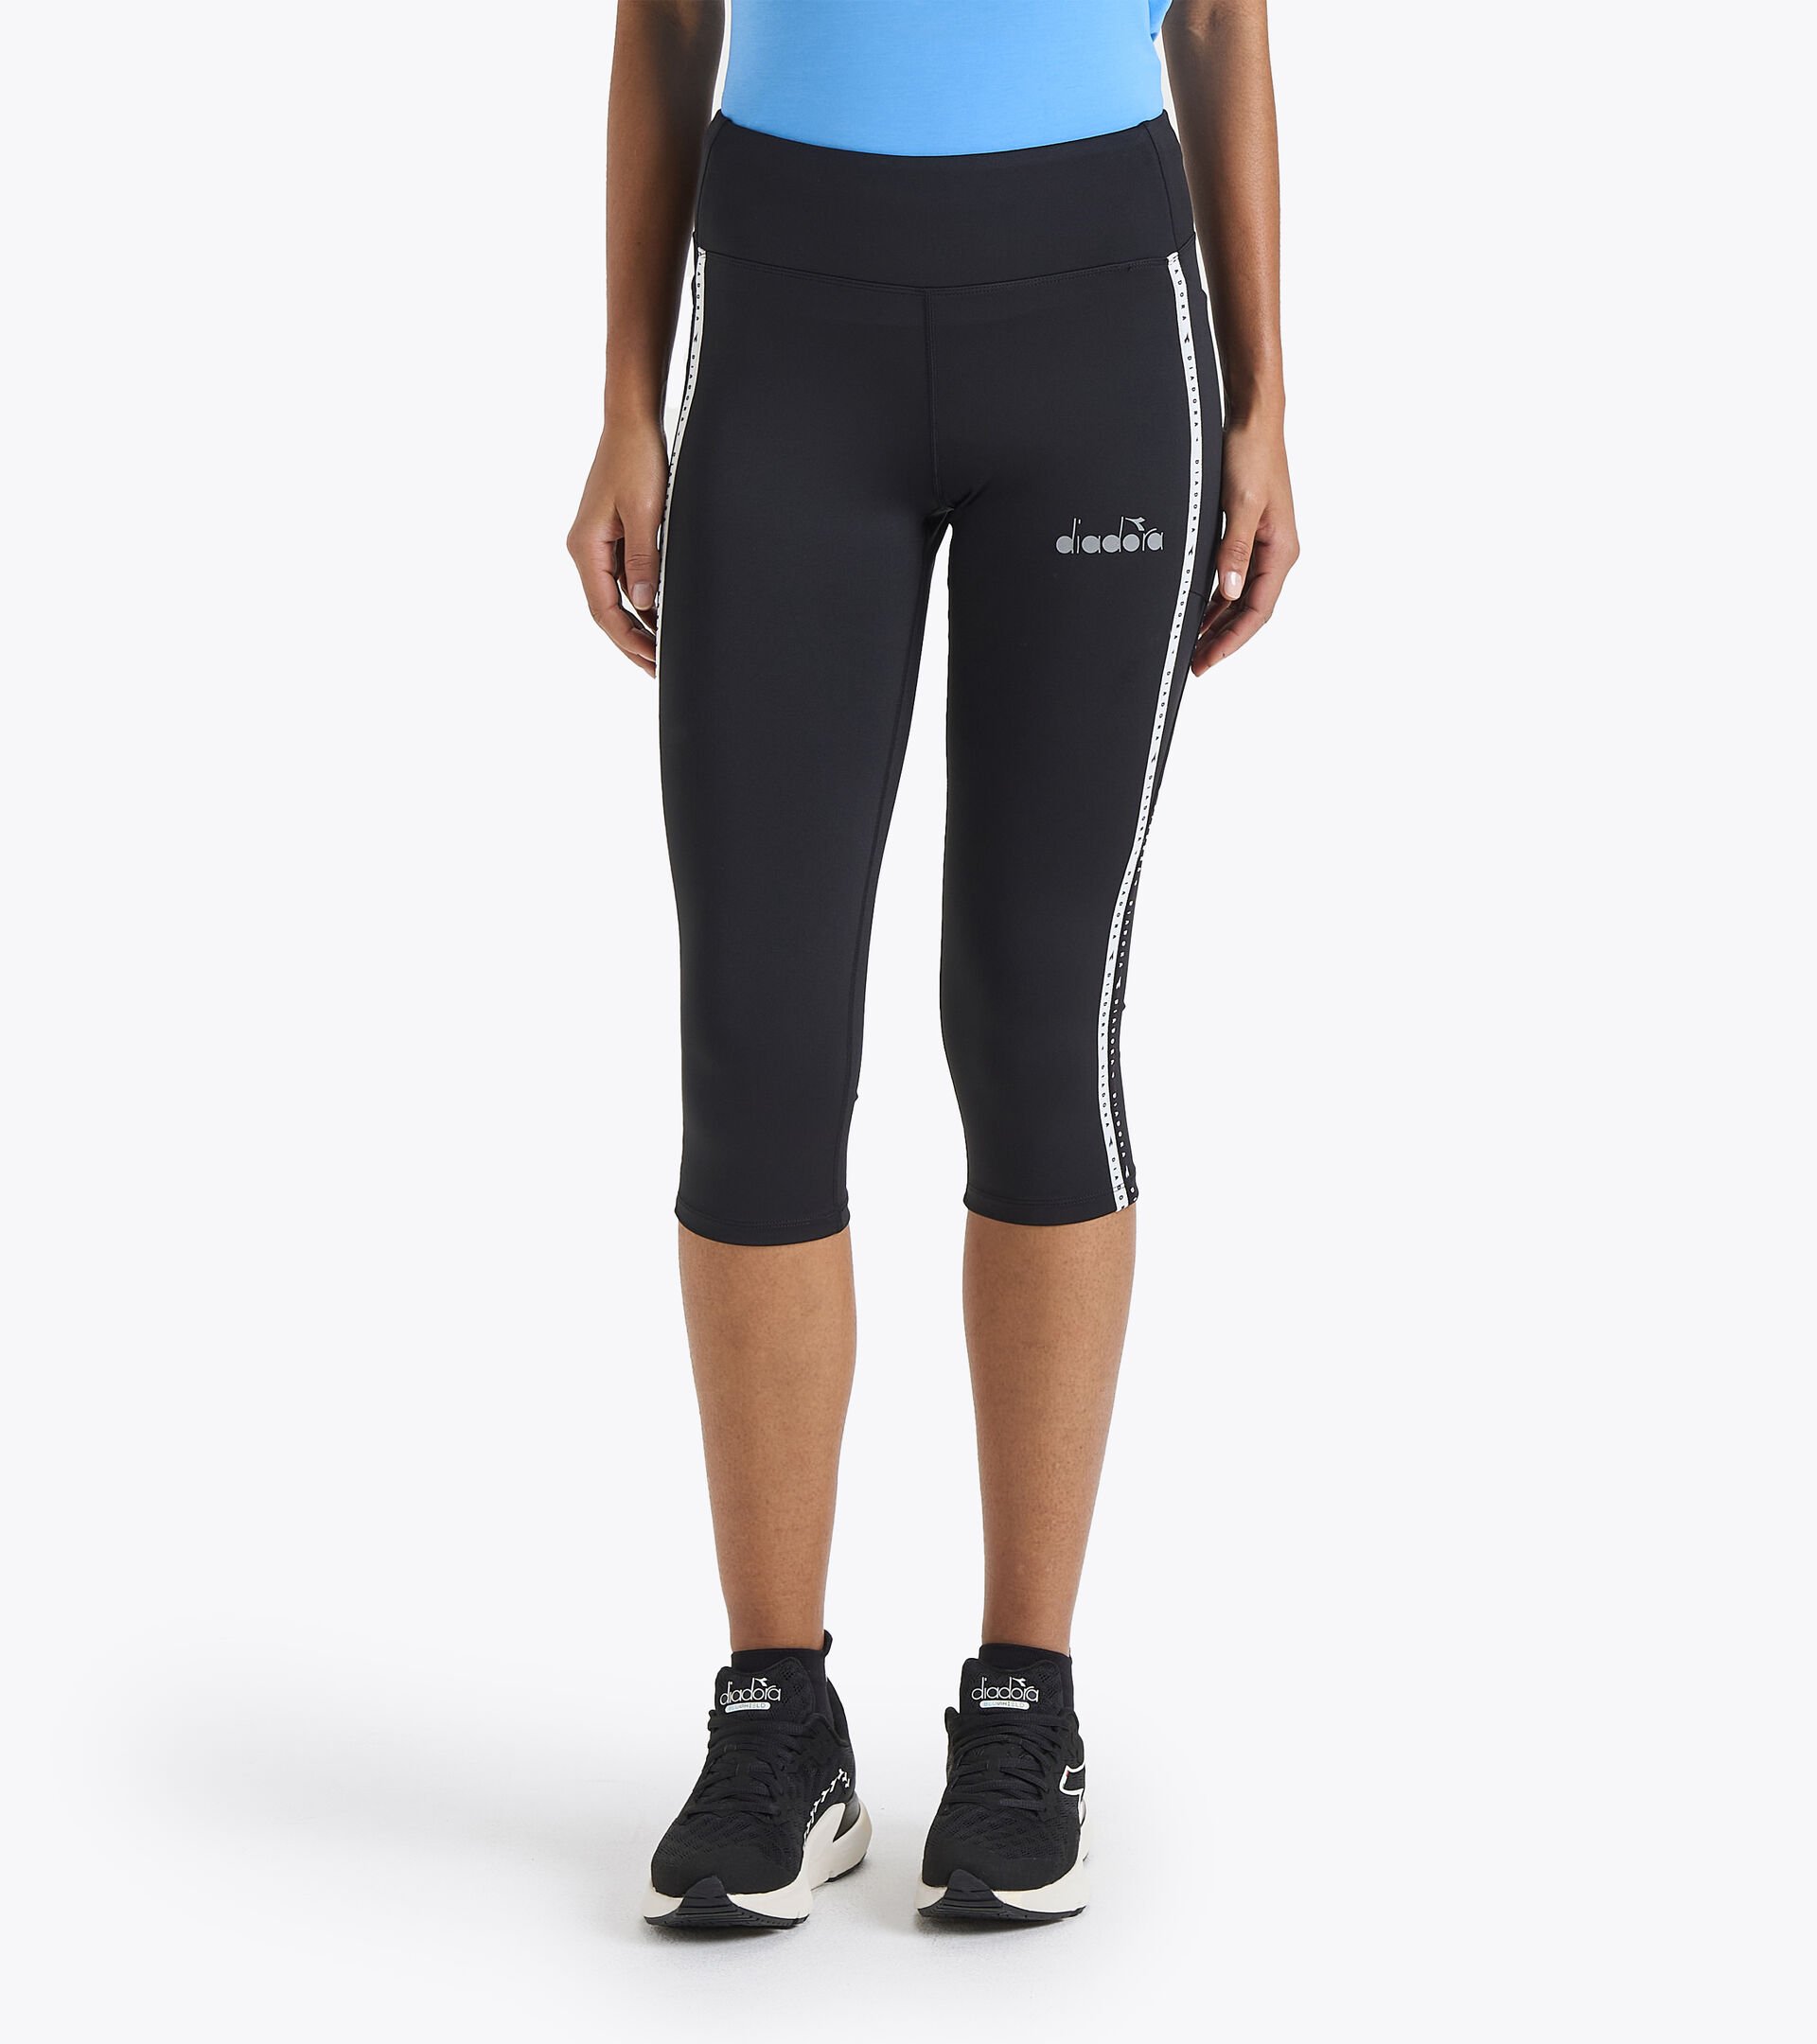 Women's Running Clothing - Compression Tights, Shorts, Tanks & Tees